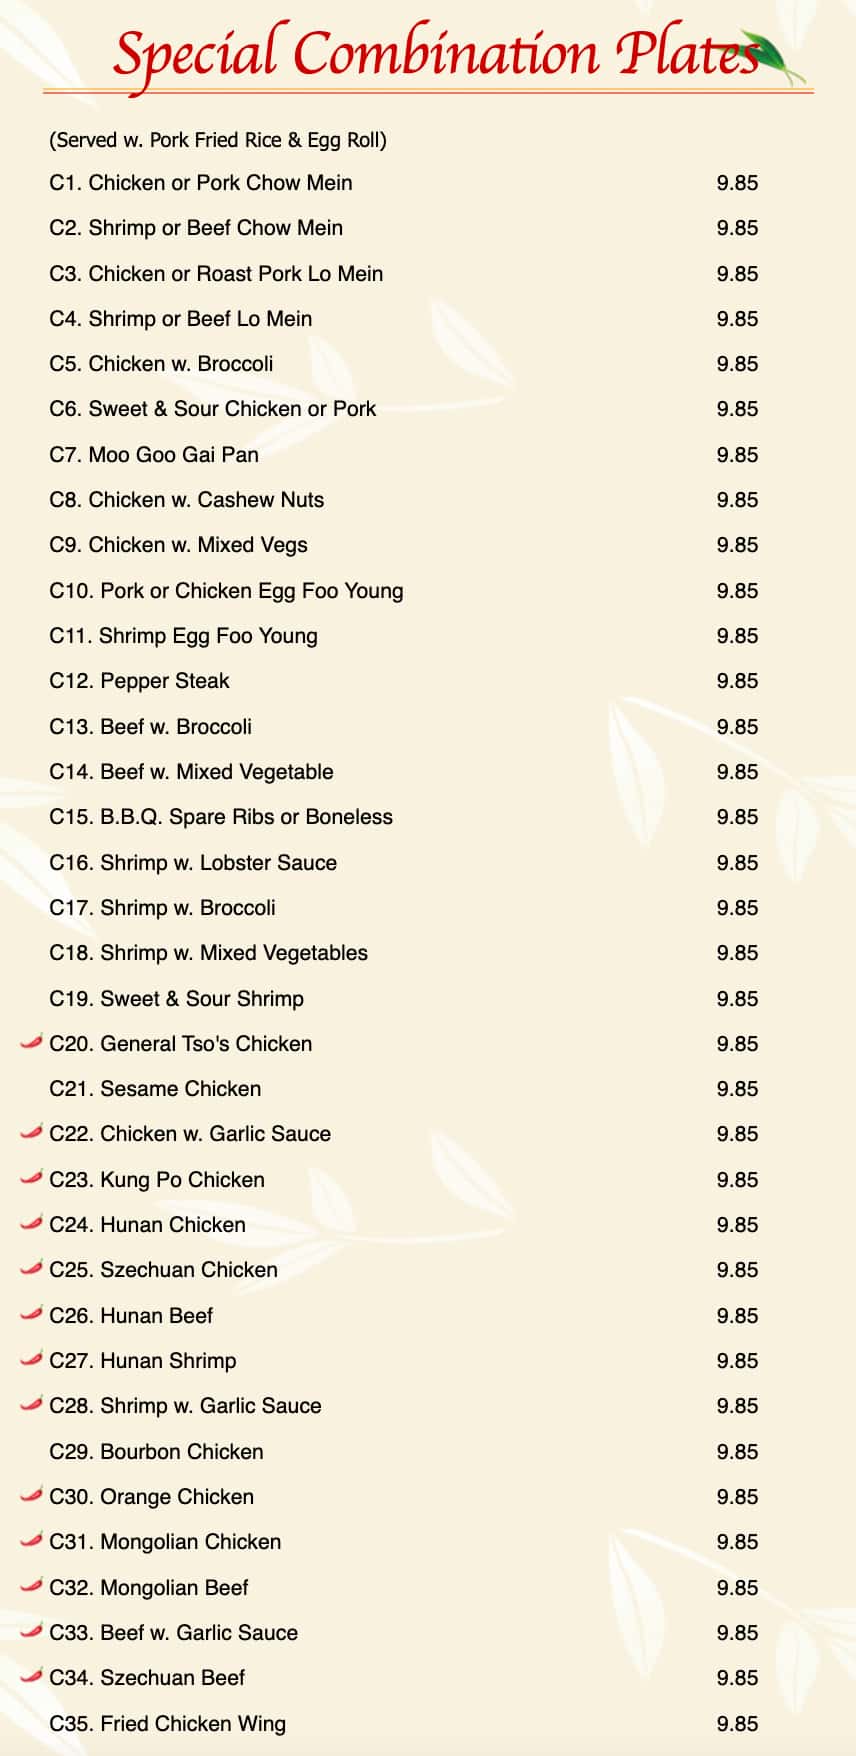 Golden City Chinese Restaurant Special Combination Plates Menu